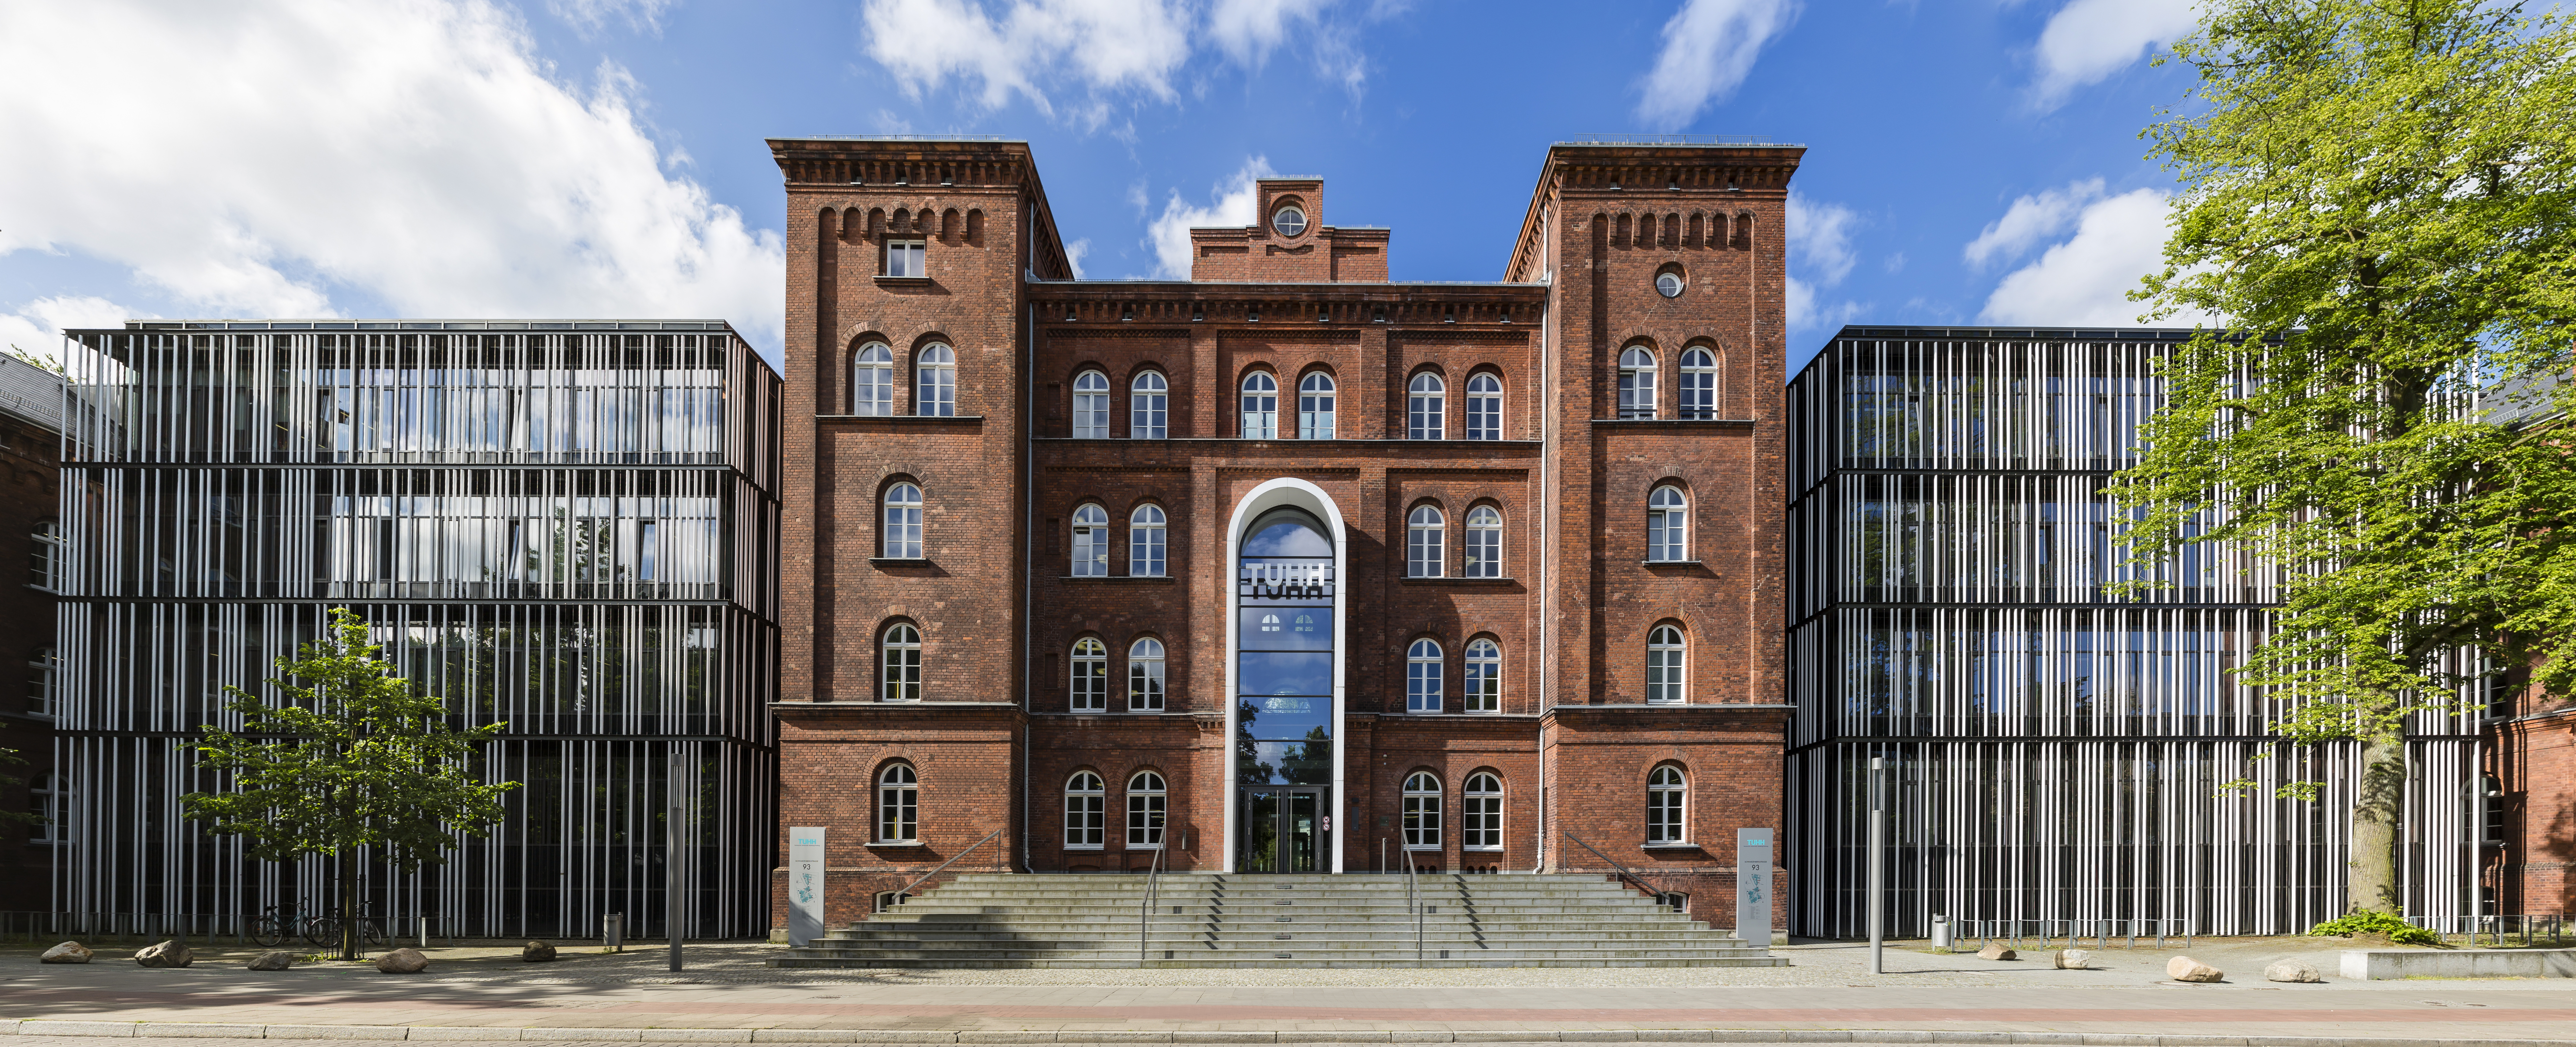 View on the entrance of the main building of the Hamburg University of Technology (TUHH)